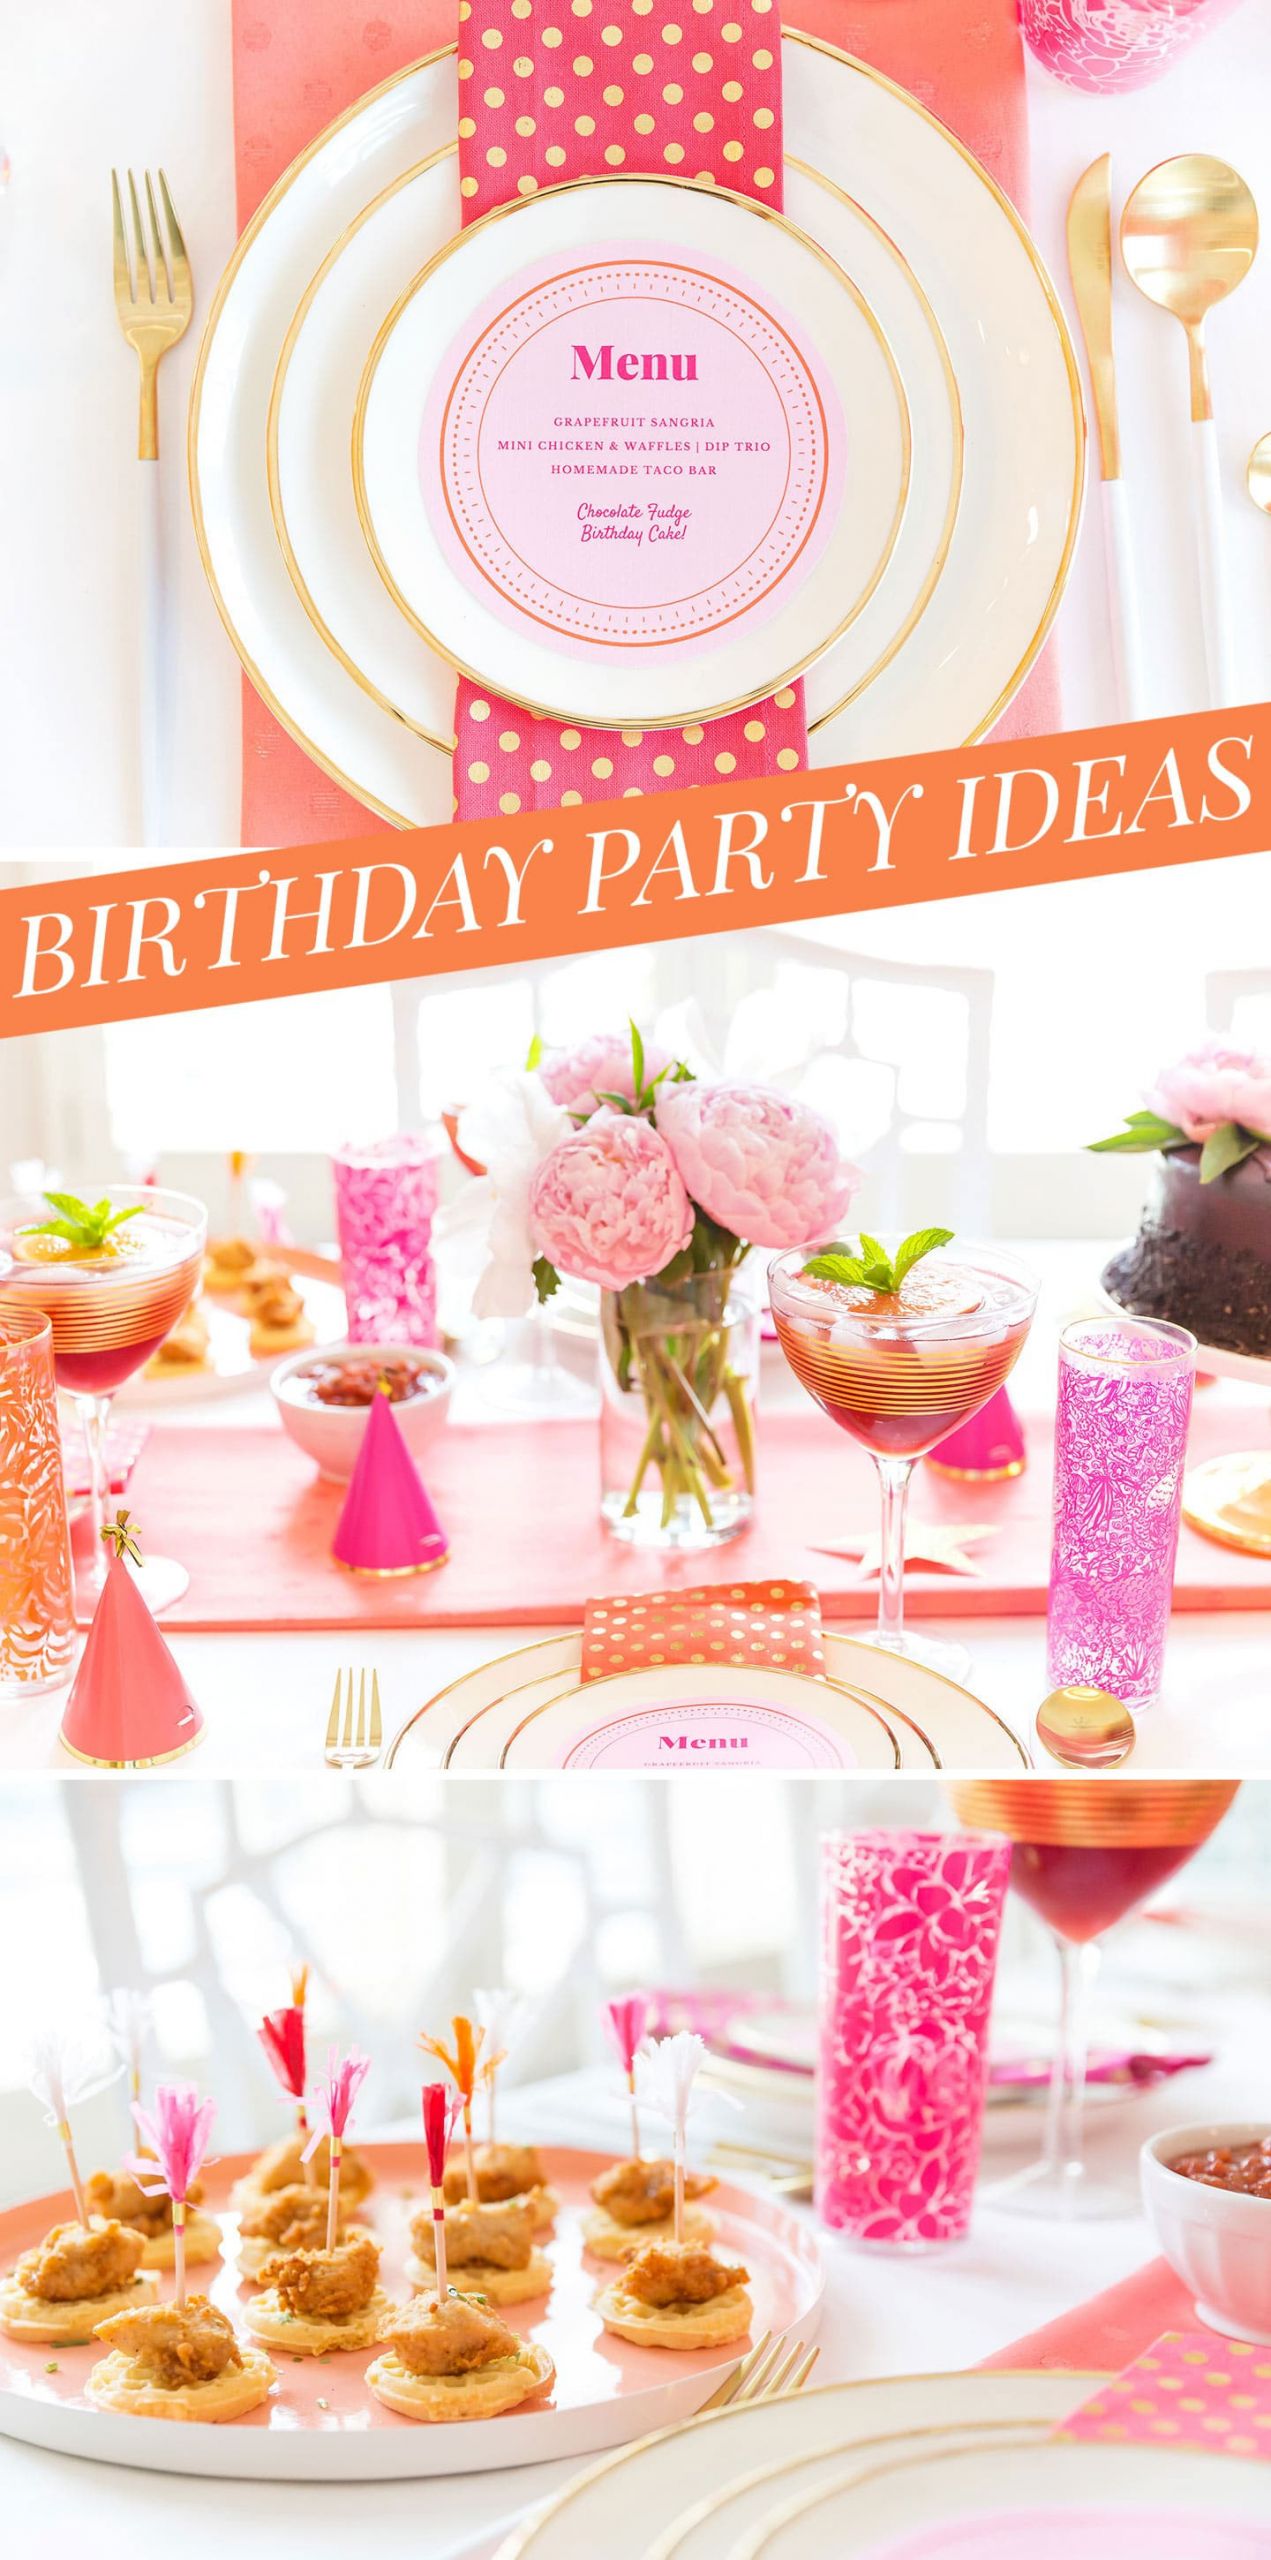 Fun Adult Birthday Party Ideas
 Creative Adult Birthday Party Ideas for the Girls